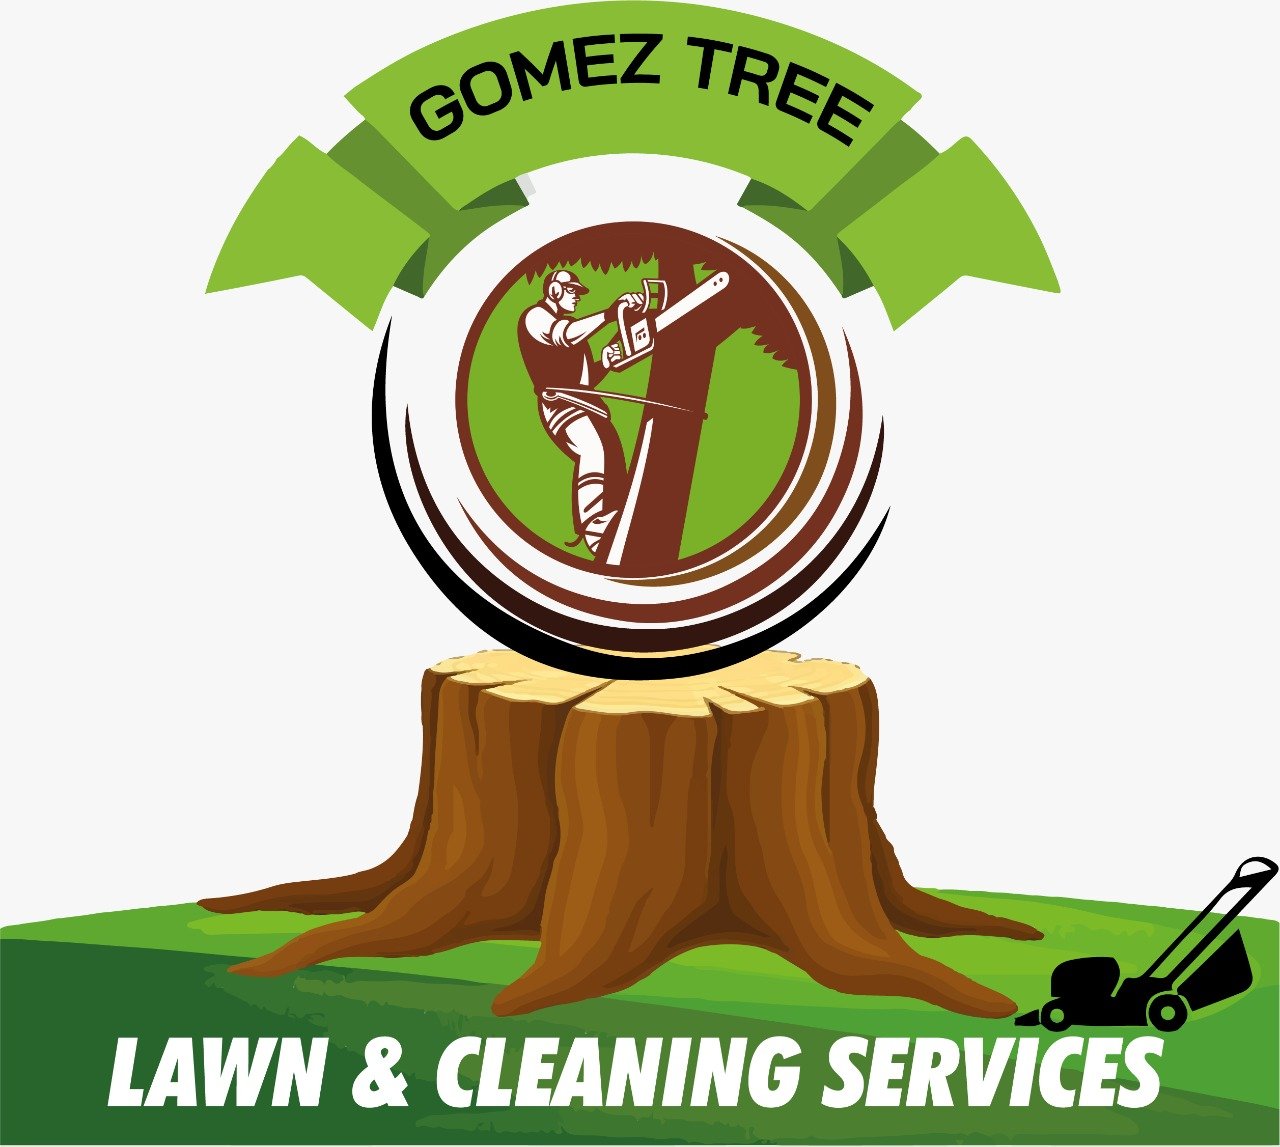 Gomez Tree, Lawn & Cleaning Services, LLC Logo